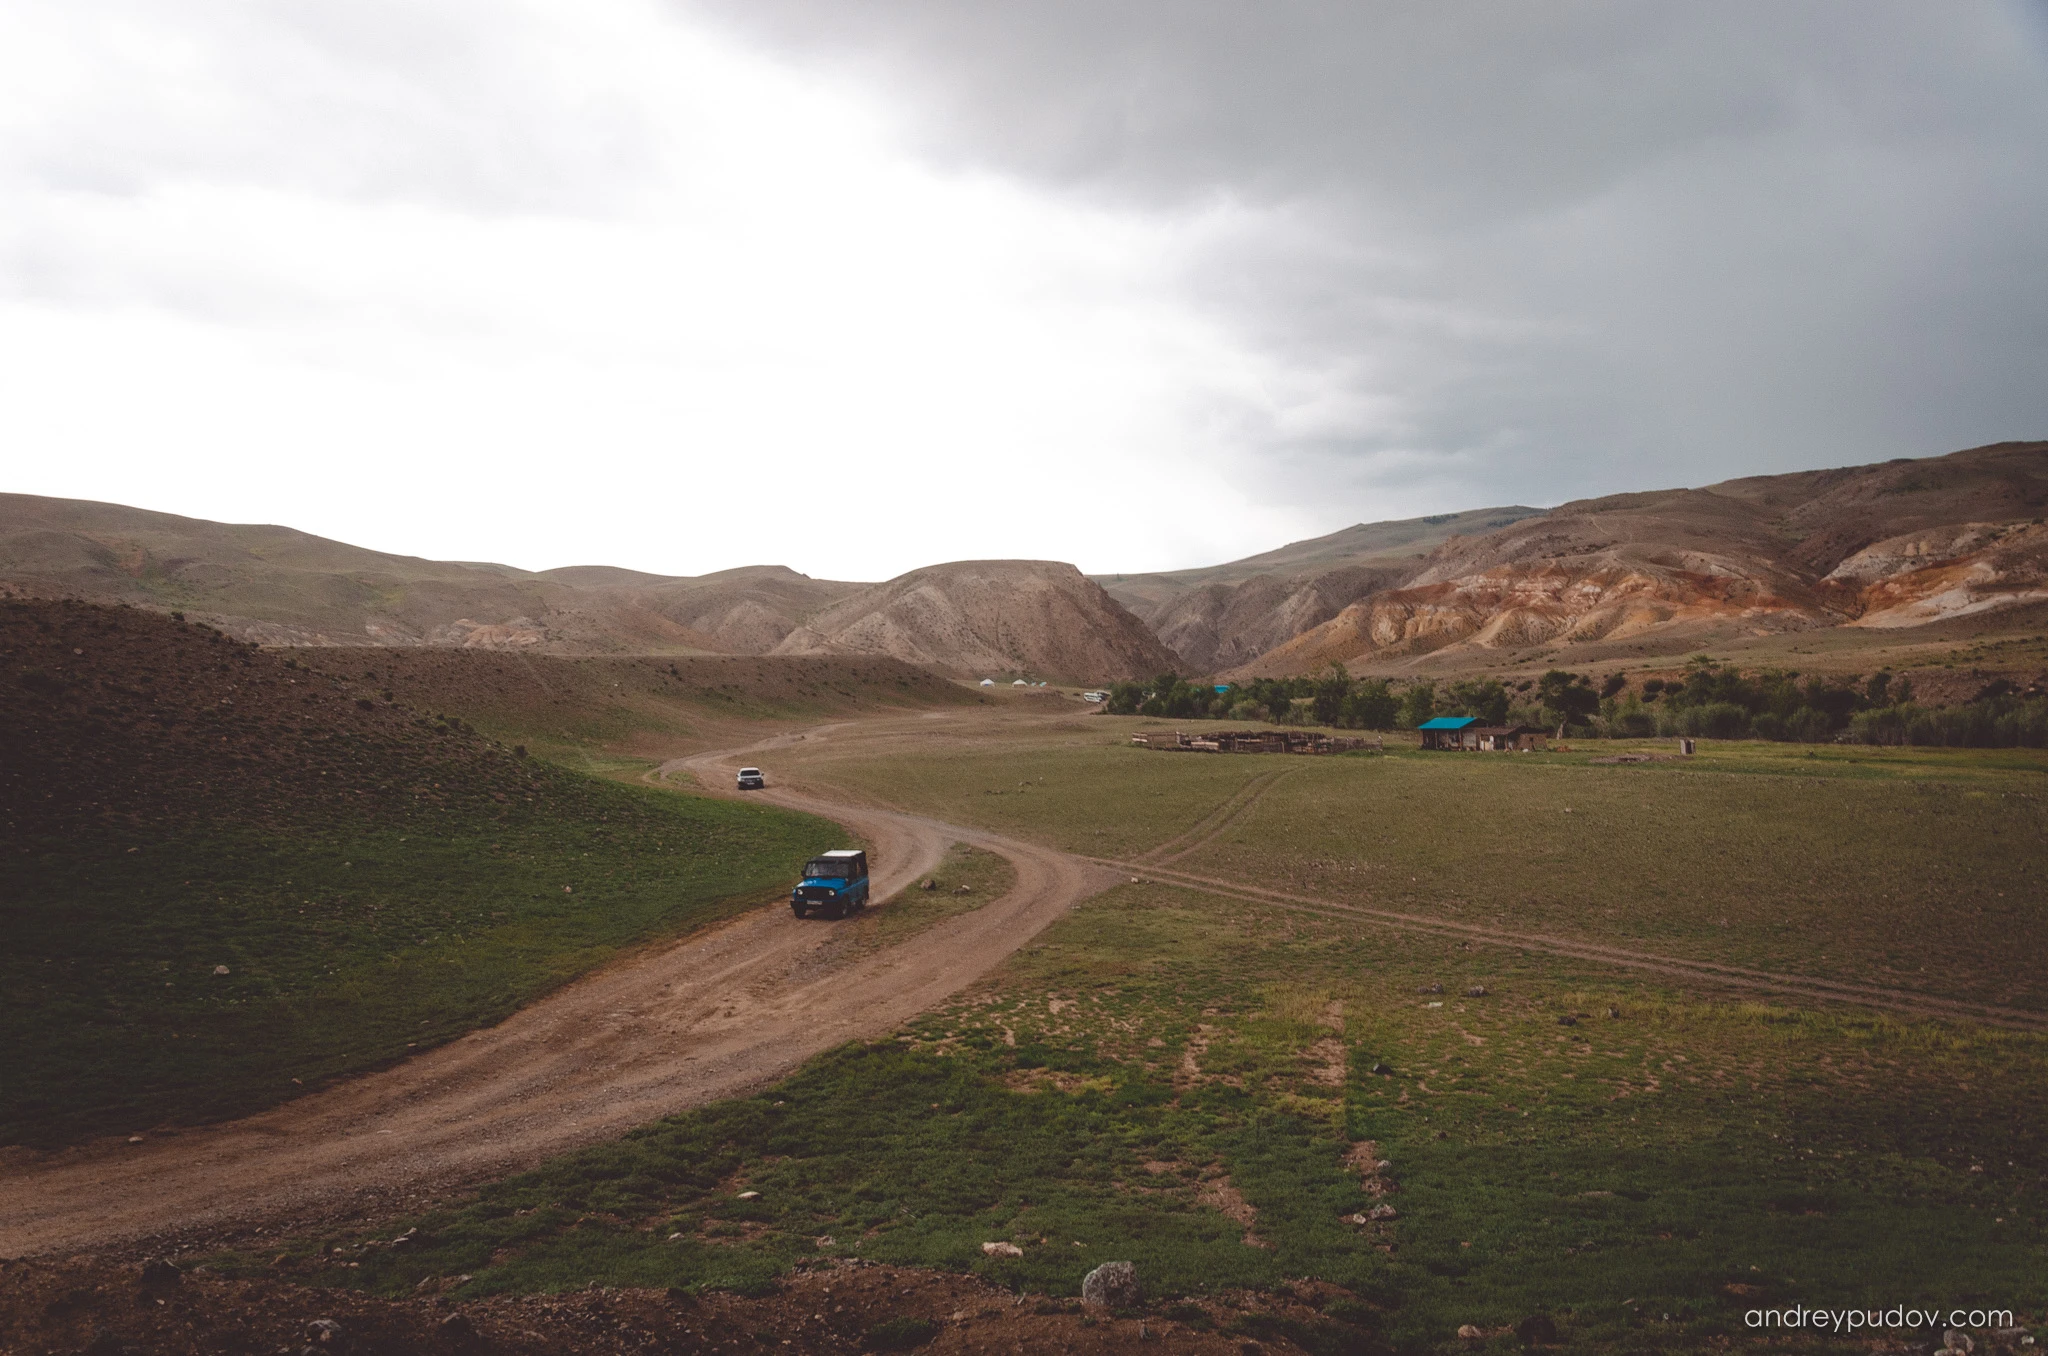 Altay. Conquering Siberia 2.0 - Martian Landscapes. Mountains of Kyzyl-Chin.